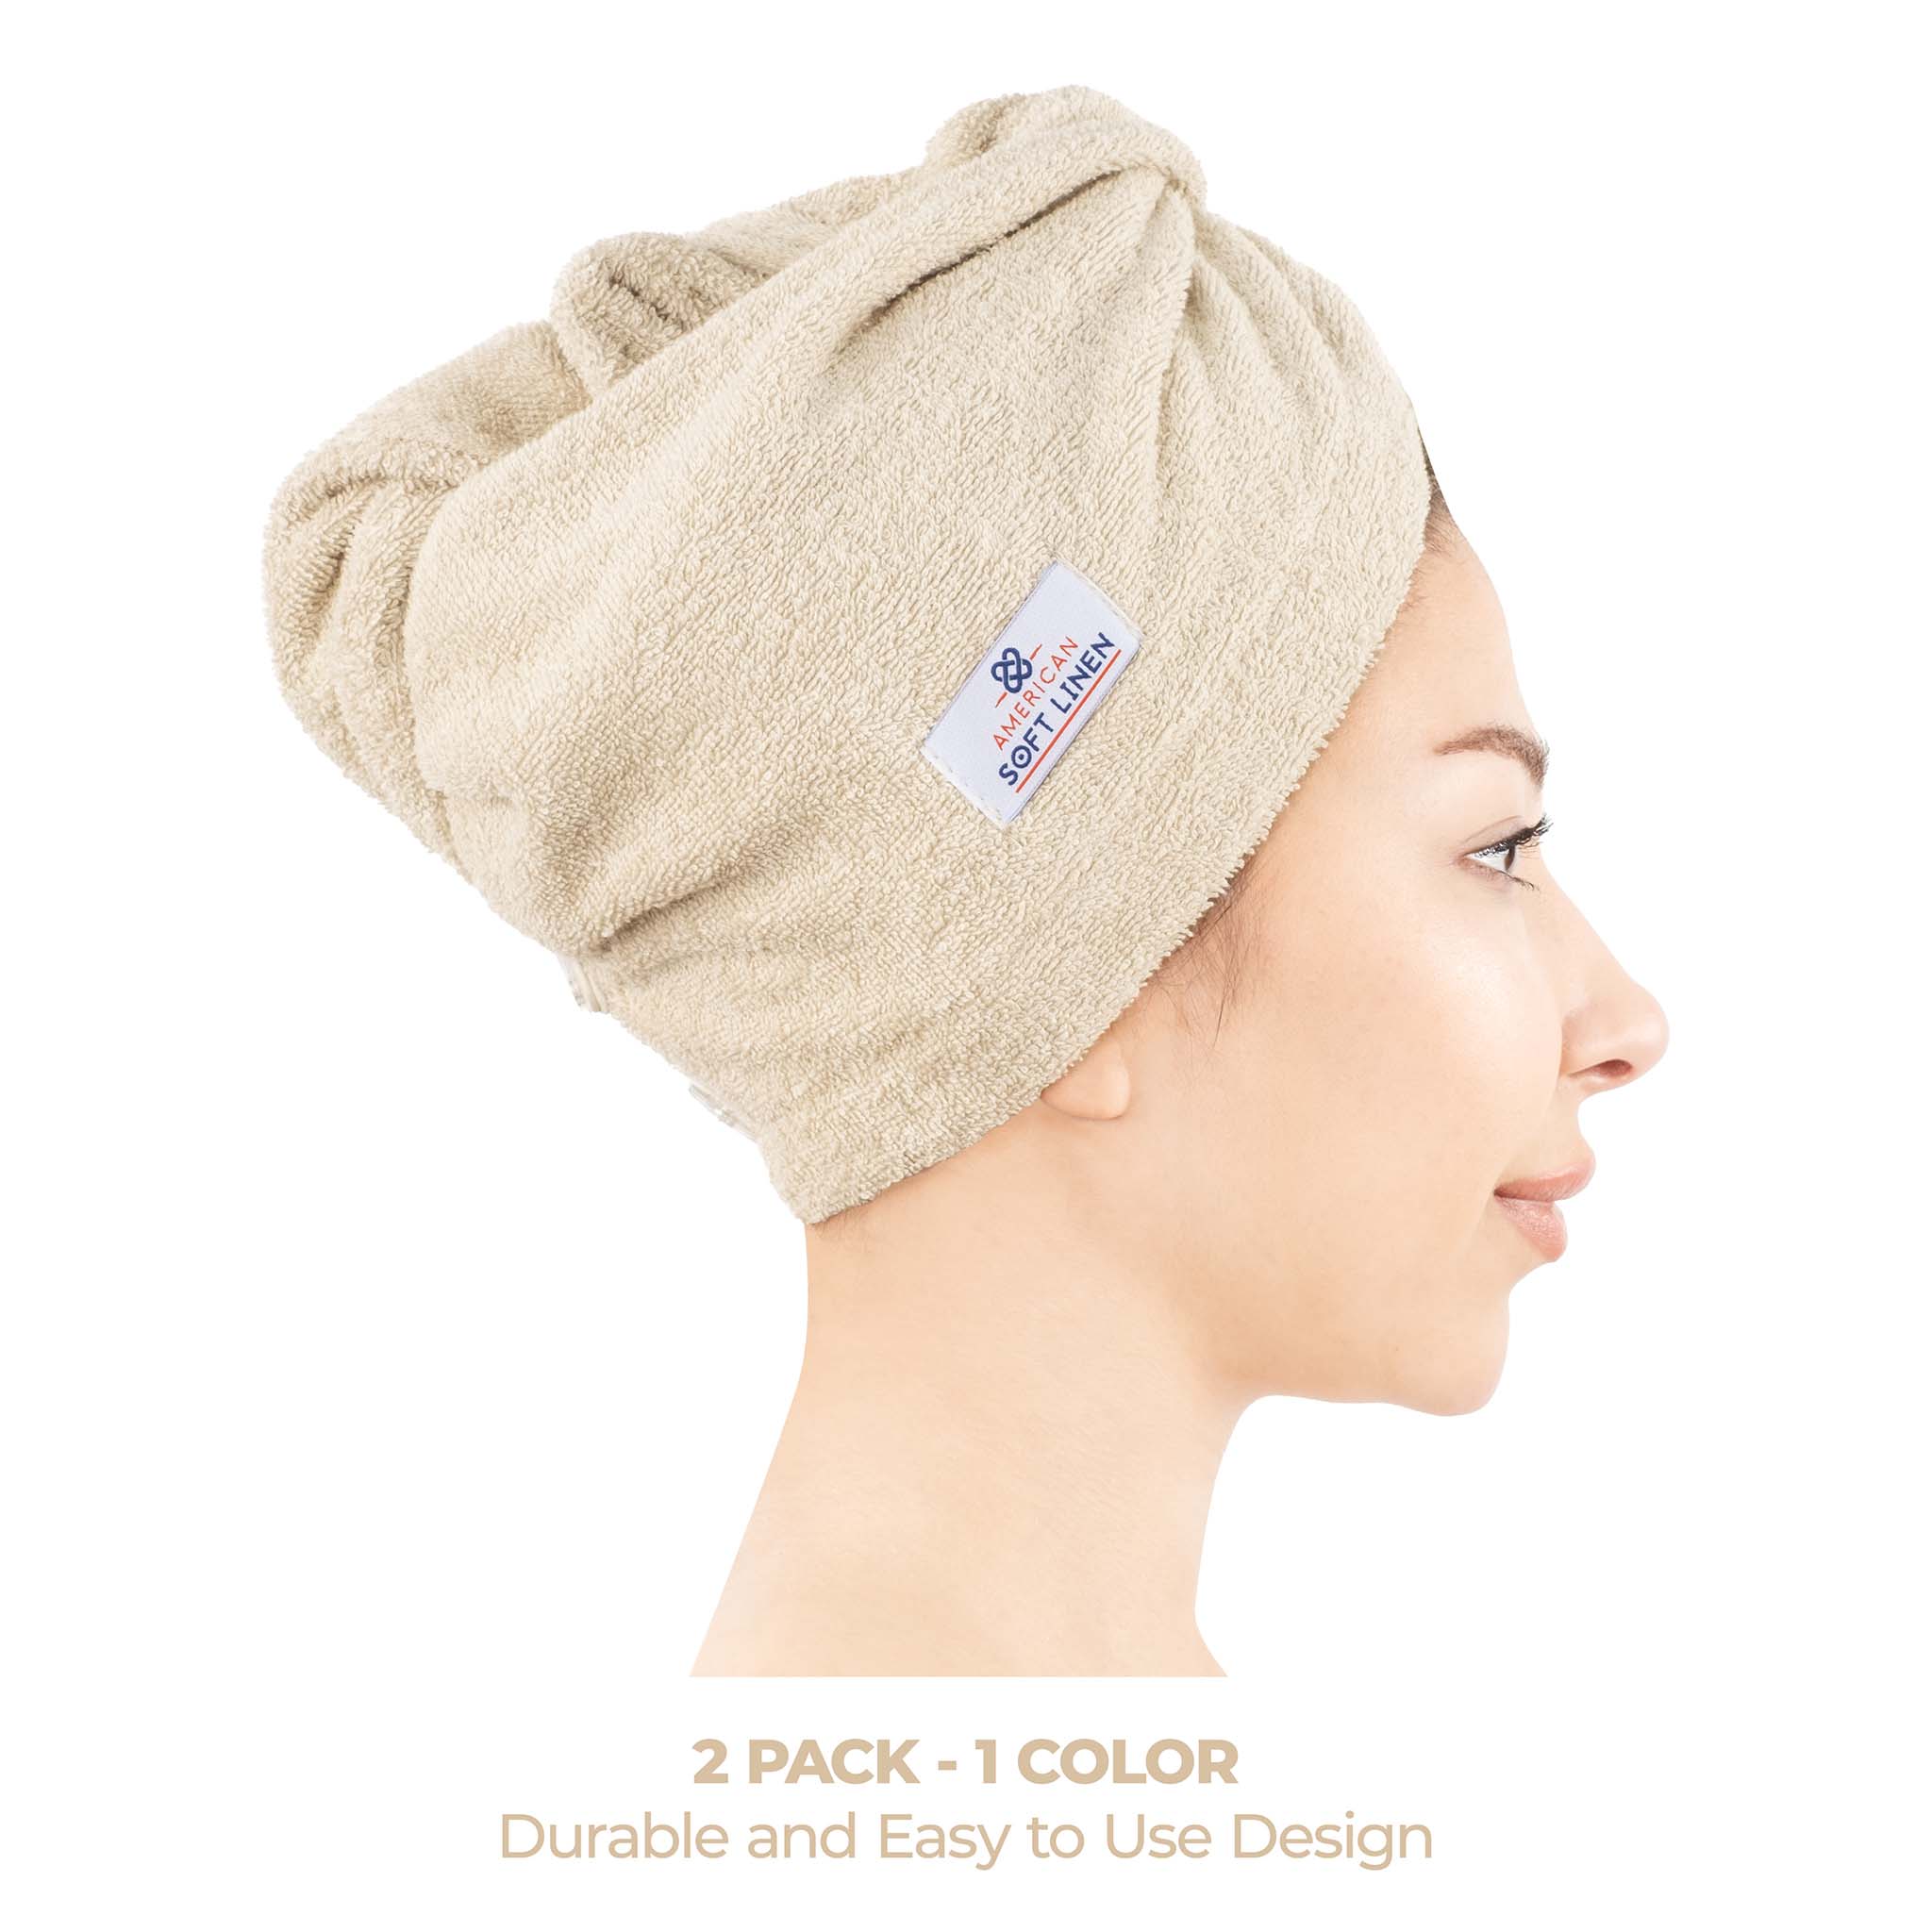 American Soft Linen 100% Cotton Hair Drying Towels for Women 2 pack 75 set case pack sand-taupe-2